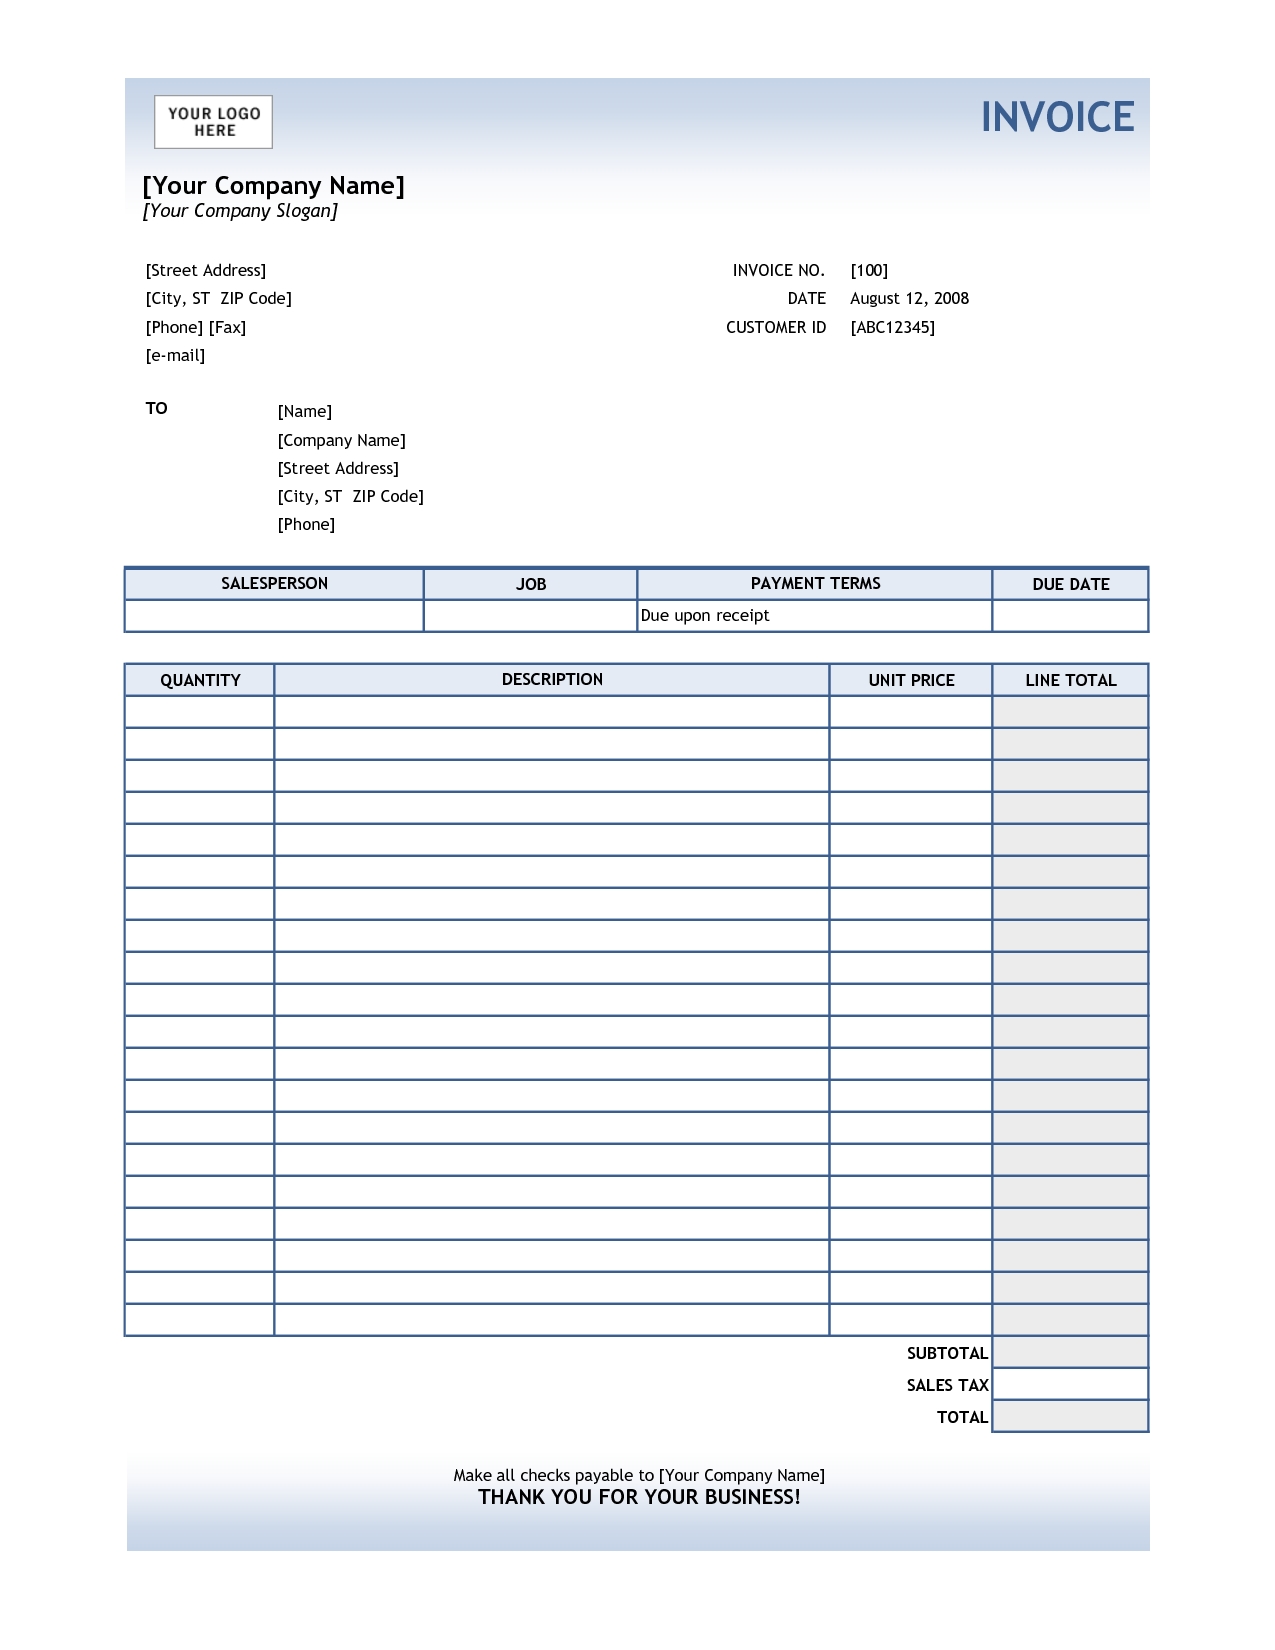 doc513666 sample of invoice format free invoice template for invoice template in excel free download